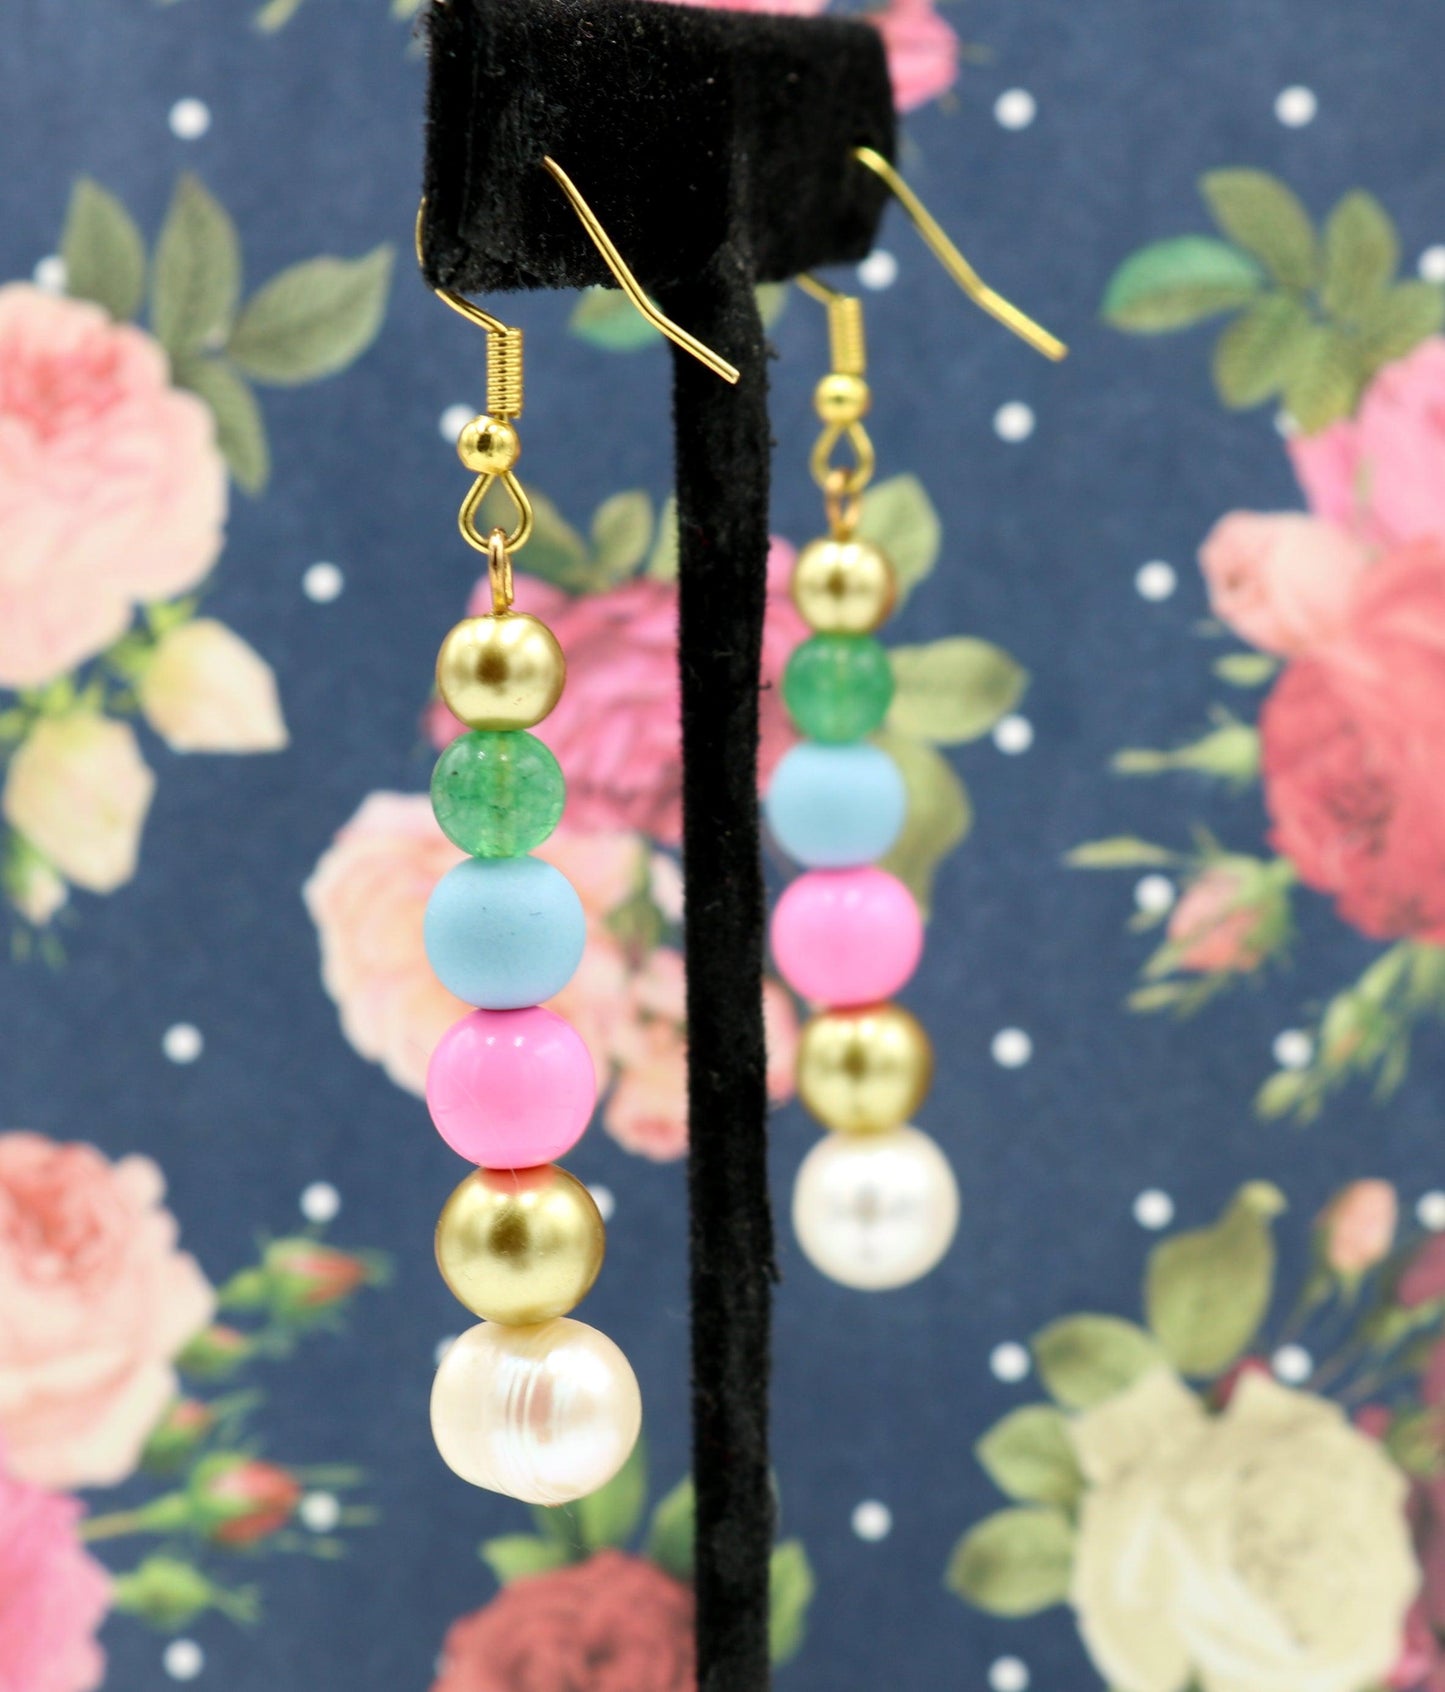 Sugar Spice and Gold Acrylic and Glass 1 3/4” Long Dangle Earrings Women’s Gift 2022 - Pink, Blue, Gold, Pearl, and Green - Free Shipping - Monkeysmojo